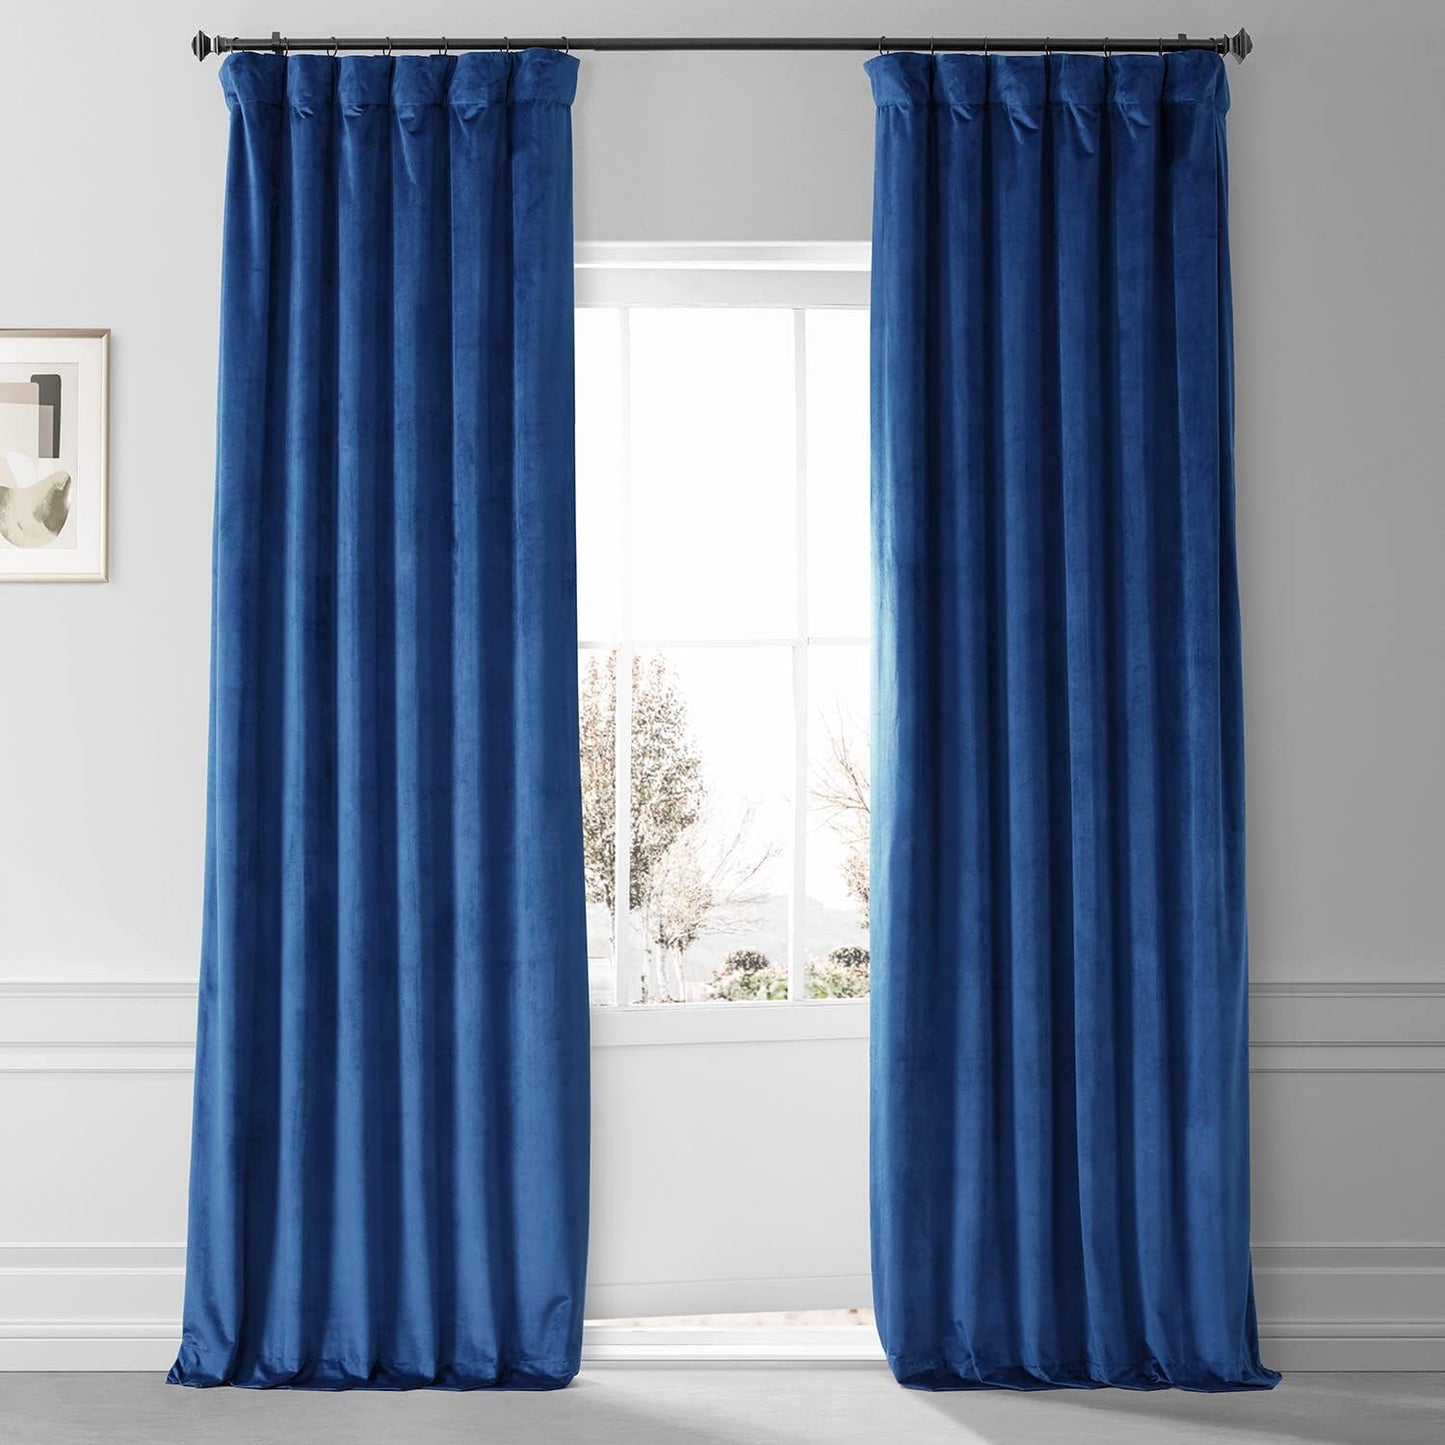 HPD HALF PRICE DRAPES Blackout Solid Thermal Insulated Window Curtain 50 X 96 Signature Plush Velvet Curtains for Bedroom & Living Room (1 Panel), VPYC-SBO198593-96, Diva Cream  Exclusive Fabrics & Furnishings Babylonian Blue 50 X 108 